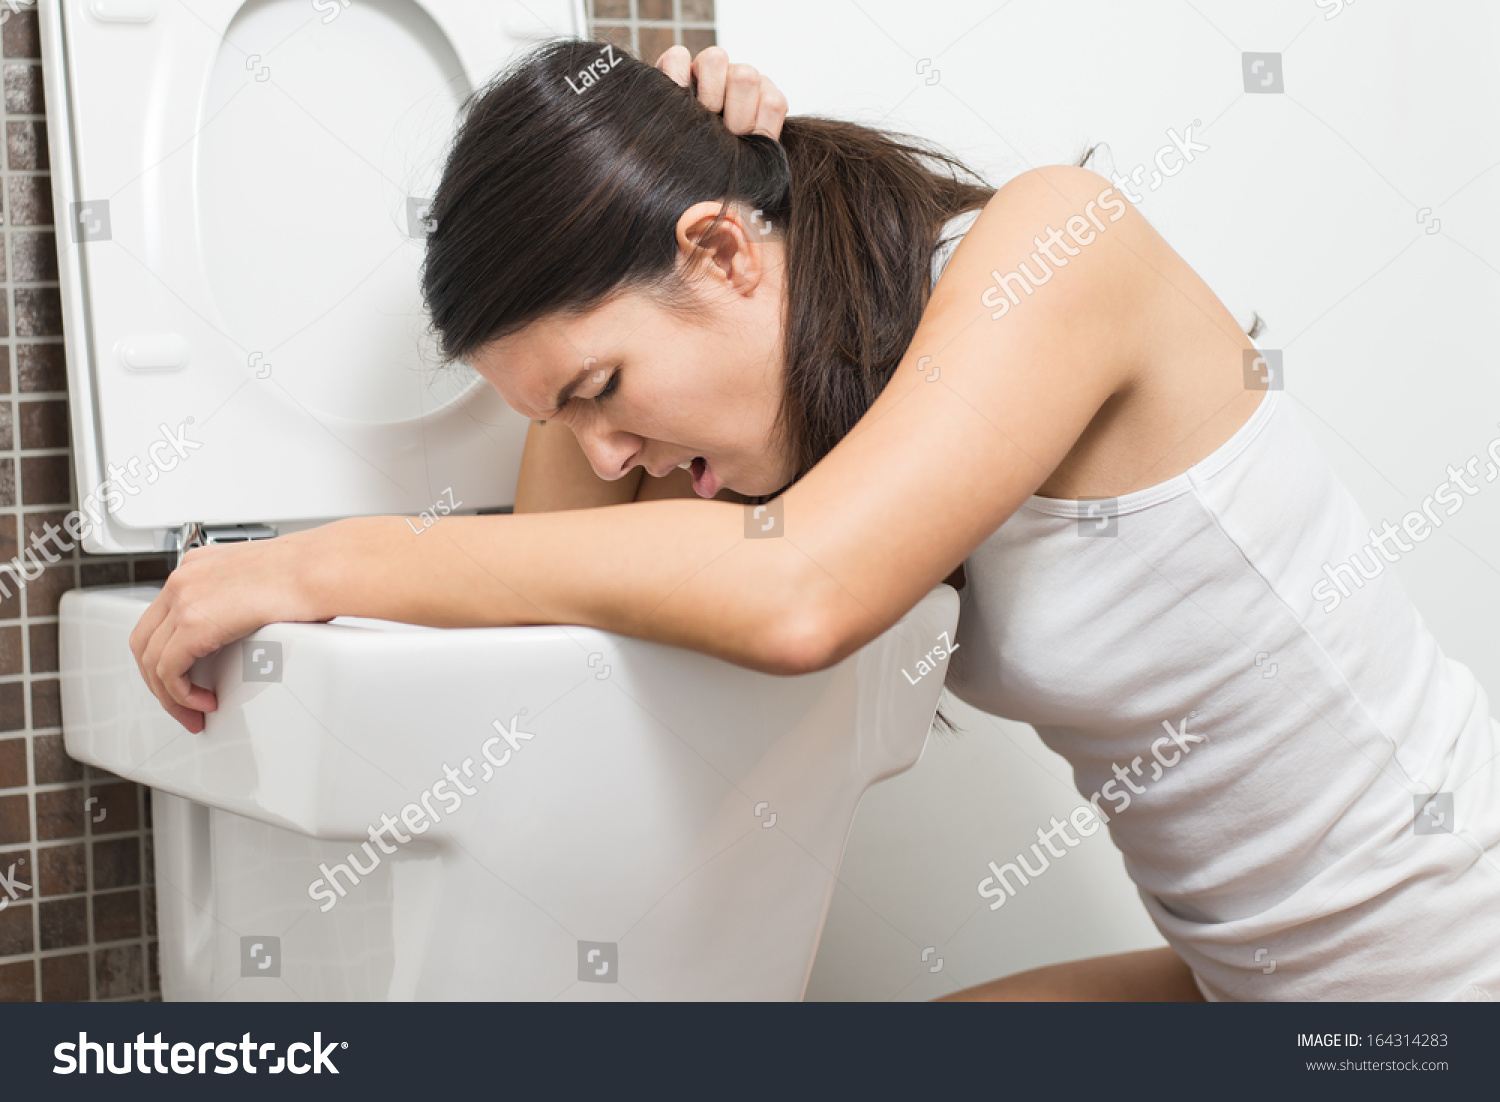 Young Woman Vomiting Into Toilet Bowl Stock Photo - Image 